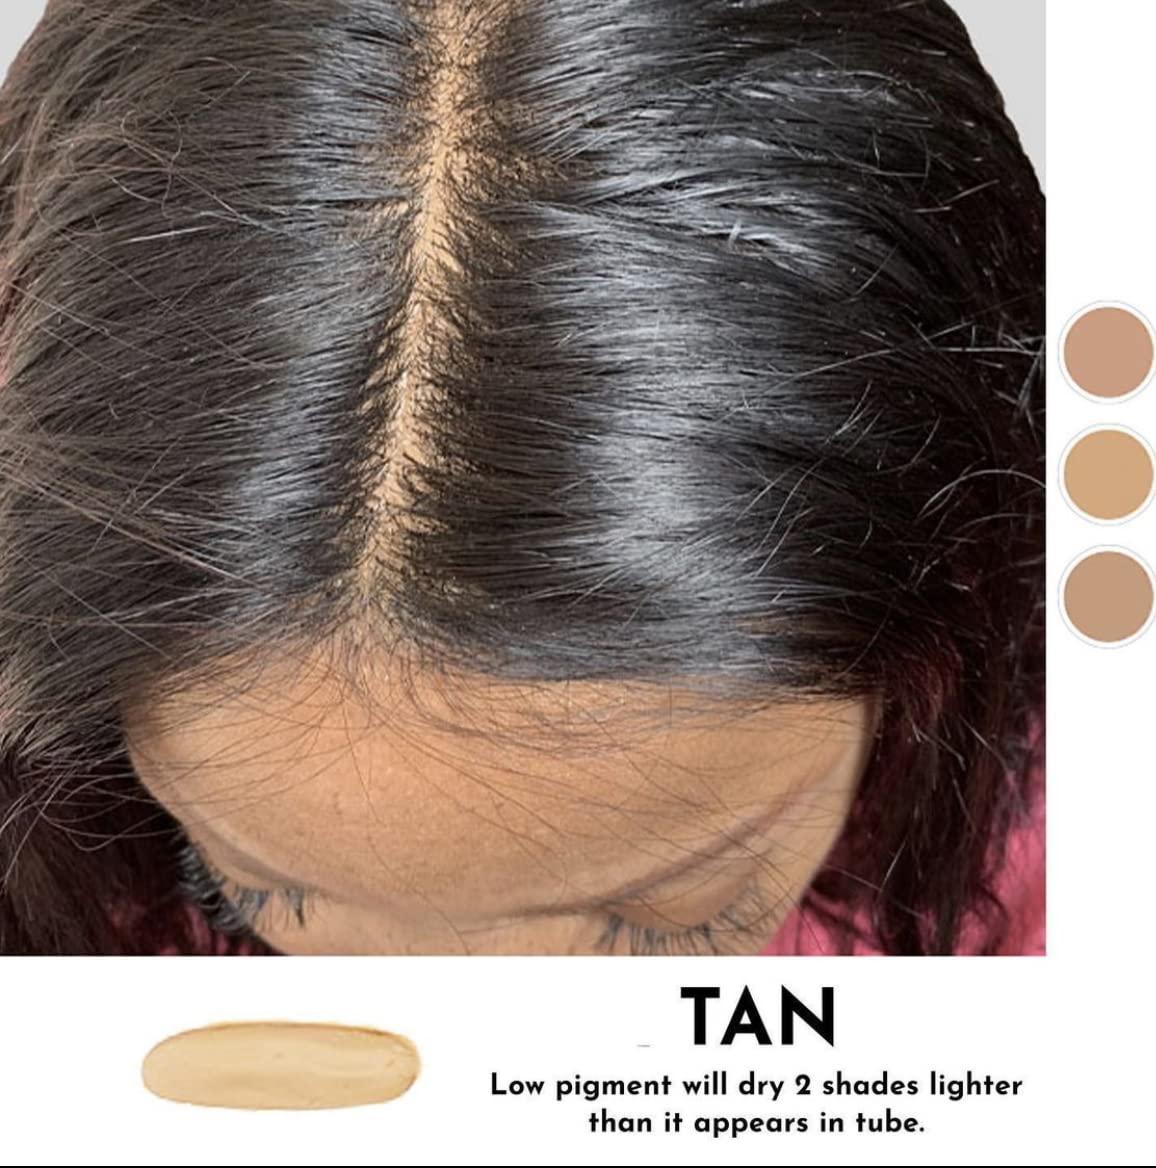 Let's cut the hassle the loooonnngg process of applying a lace wig to  almost perfection . The lace grid concealer is going to perfection in just  5, By Perfectlineswiss